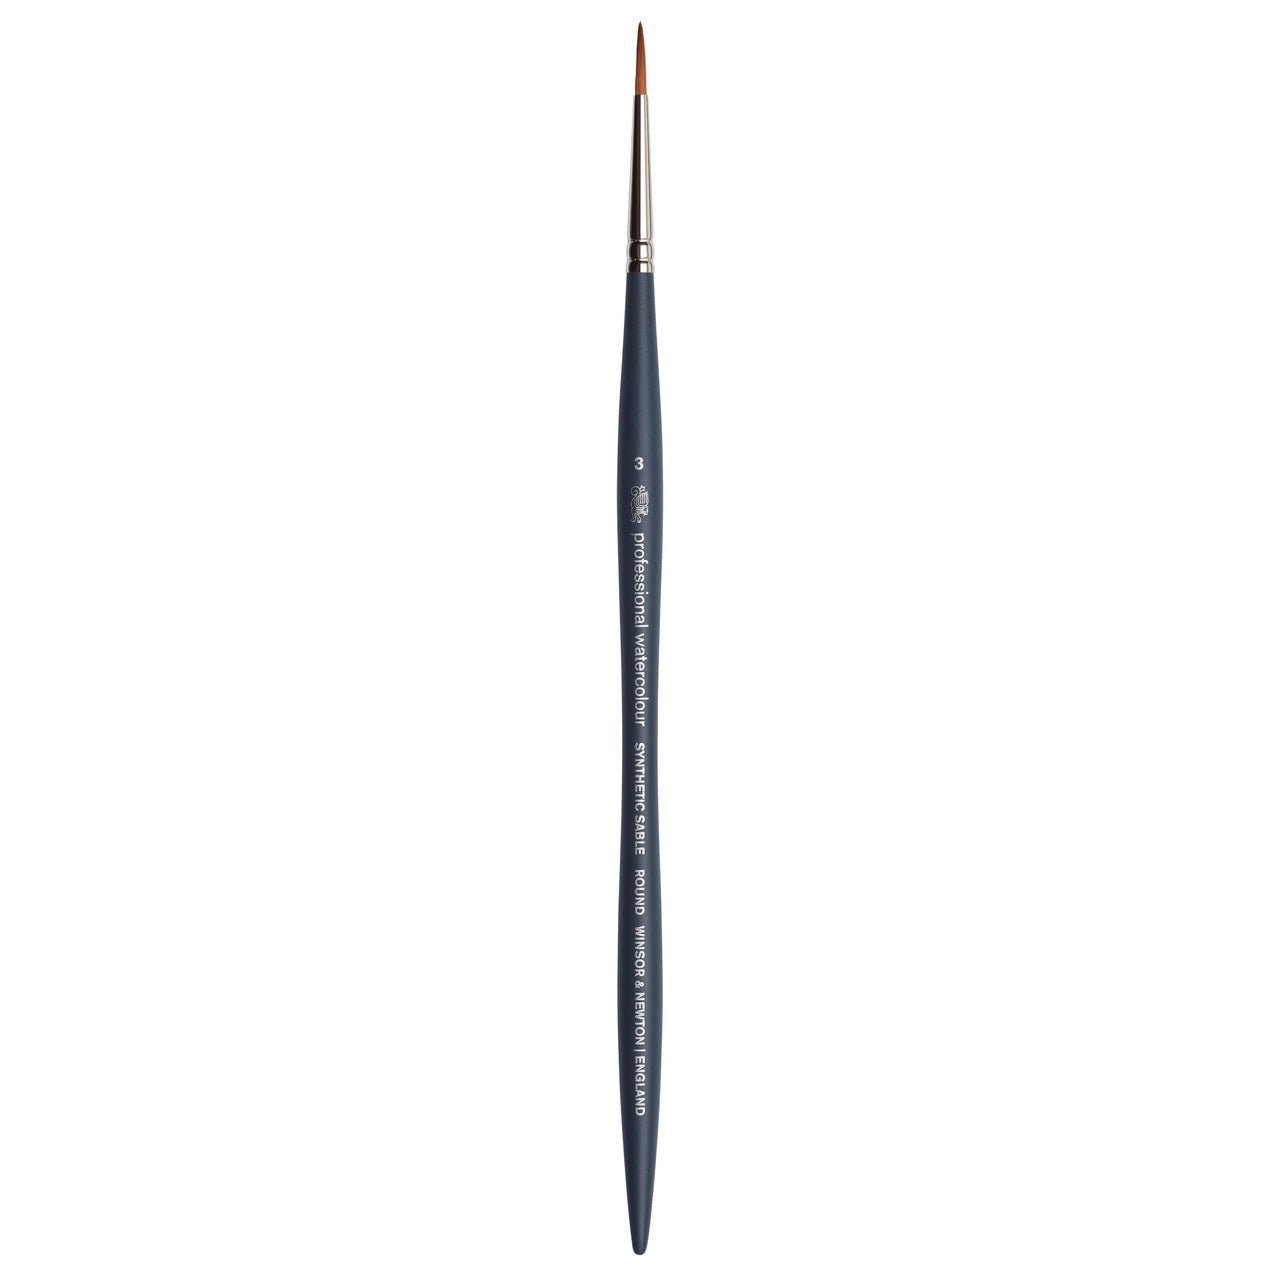 Winsor & Newton Professional Watercolor Synthetic Sable Brush - Round 3 - merriartist.com